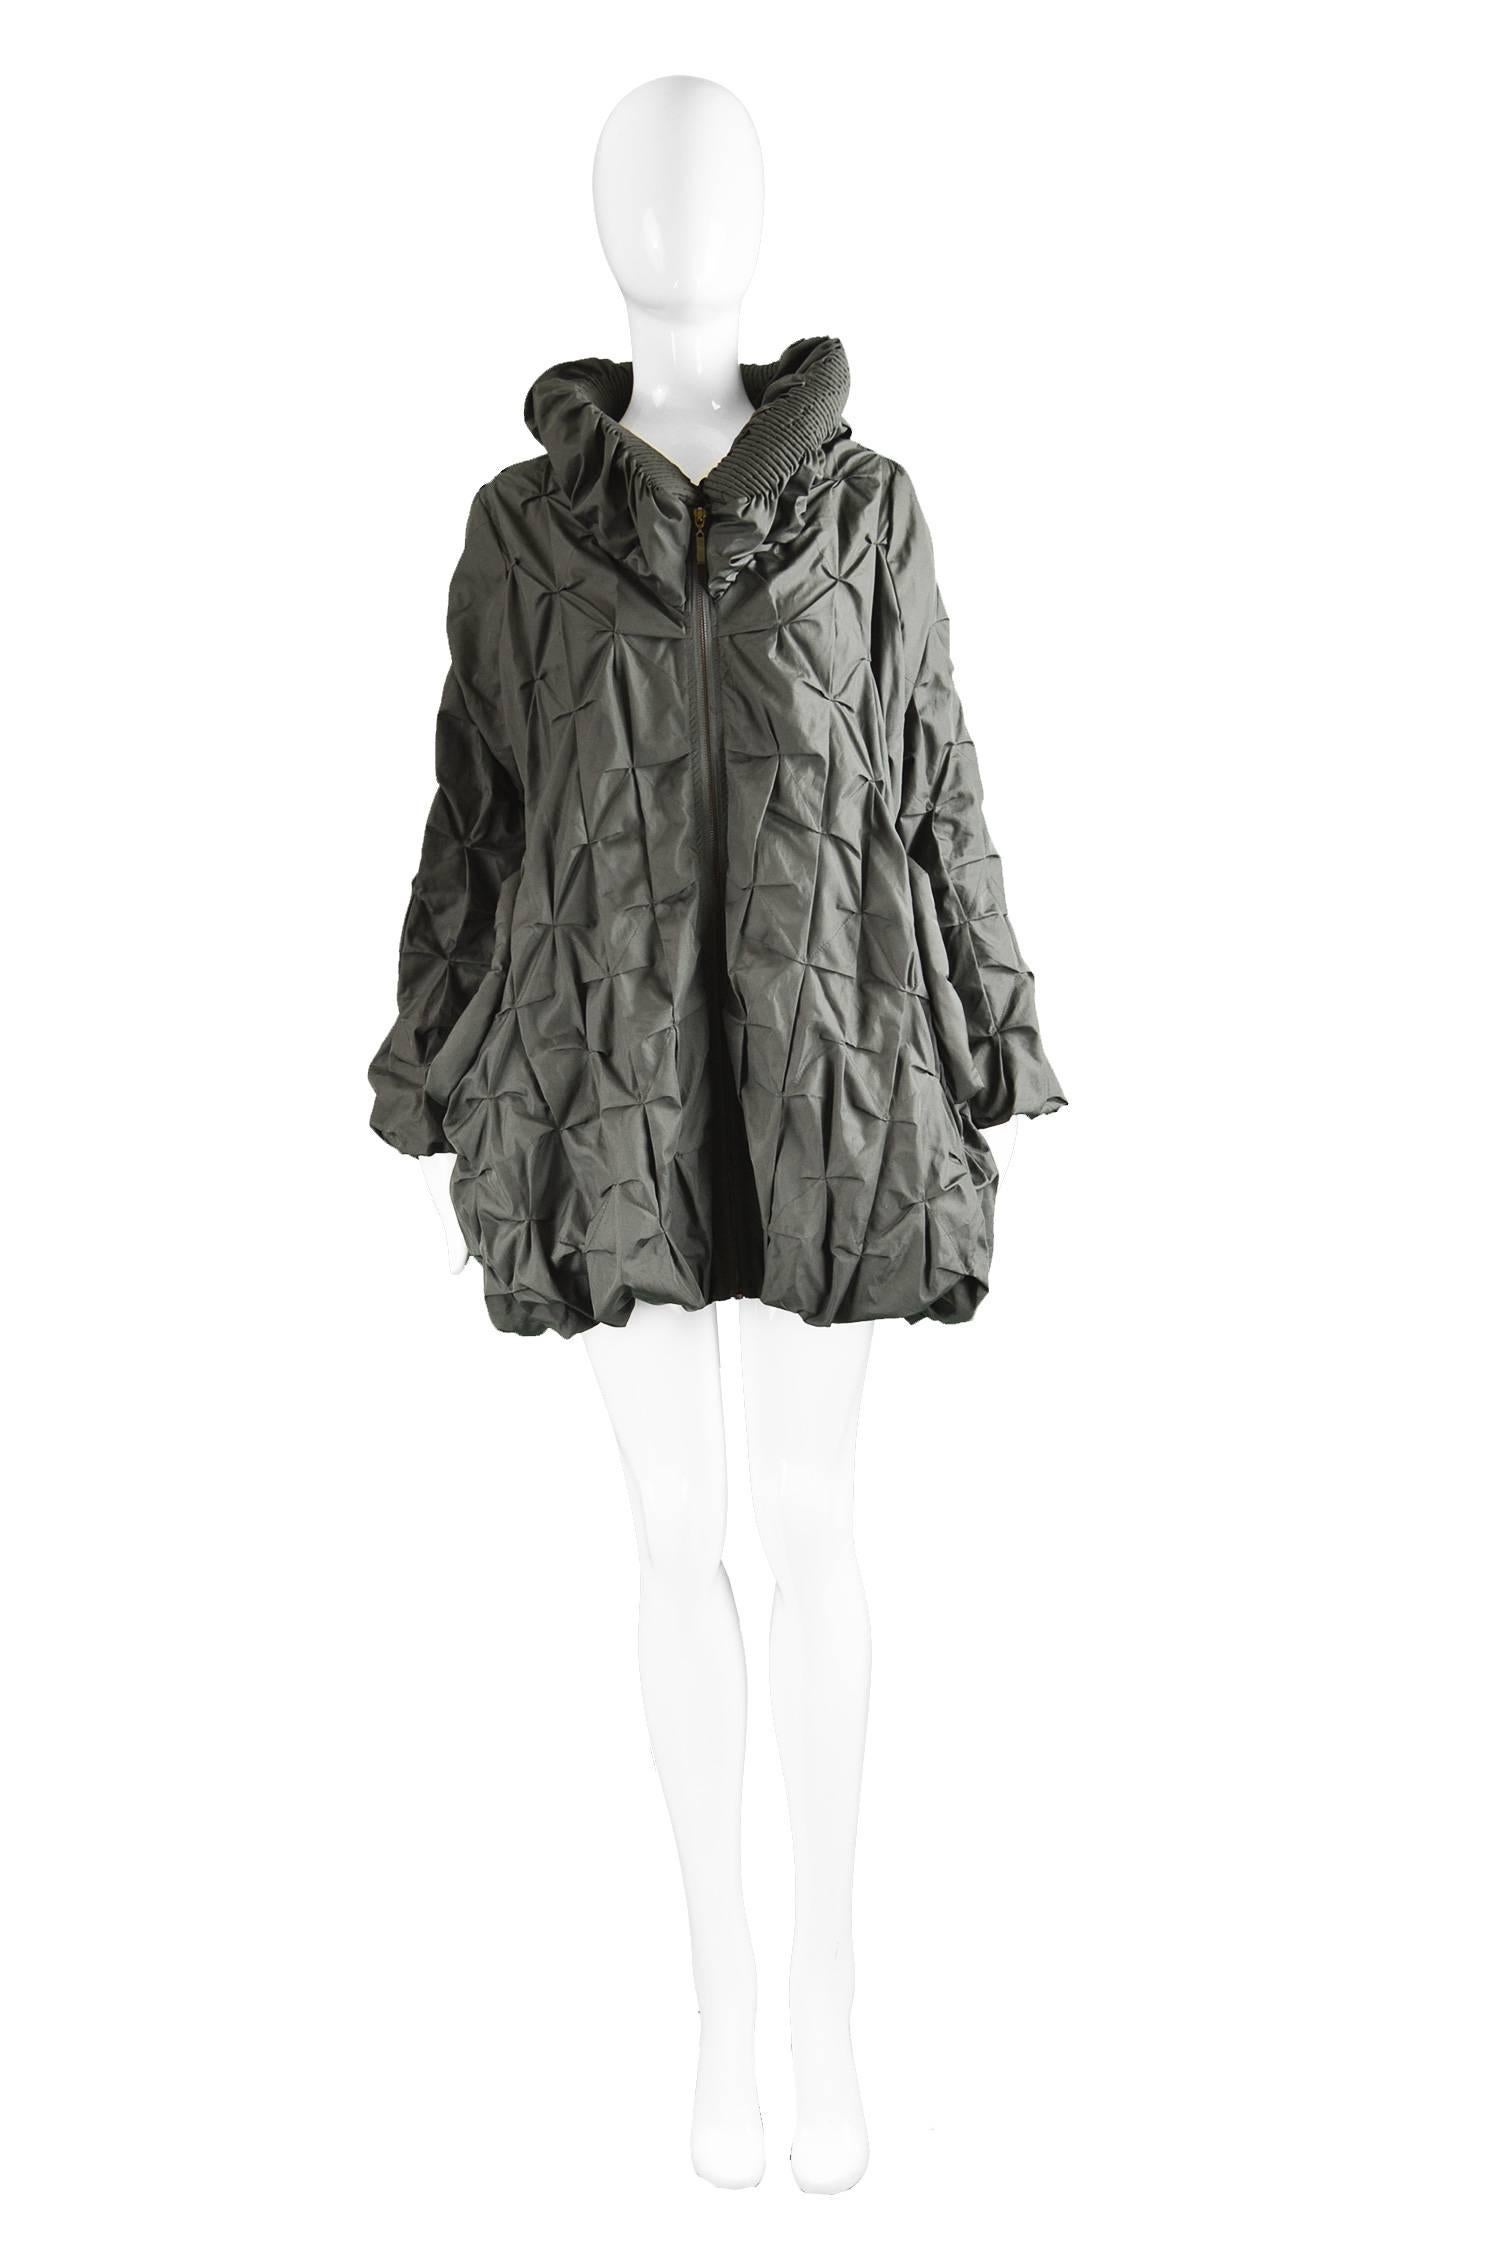 Lanvin Avant Garde Grey Geometric Pleated Oversized Jacket, Spring 2008

Size: Marked a women's Large but it has a loose, swing fit so will suit smaller. Please check measurements. 
Bust - up to 46” / 117cm
Length (Shoulder to Hem) - 30” /